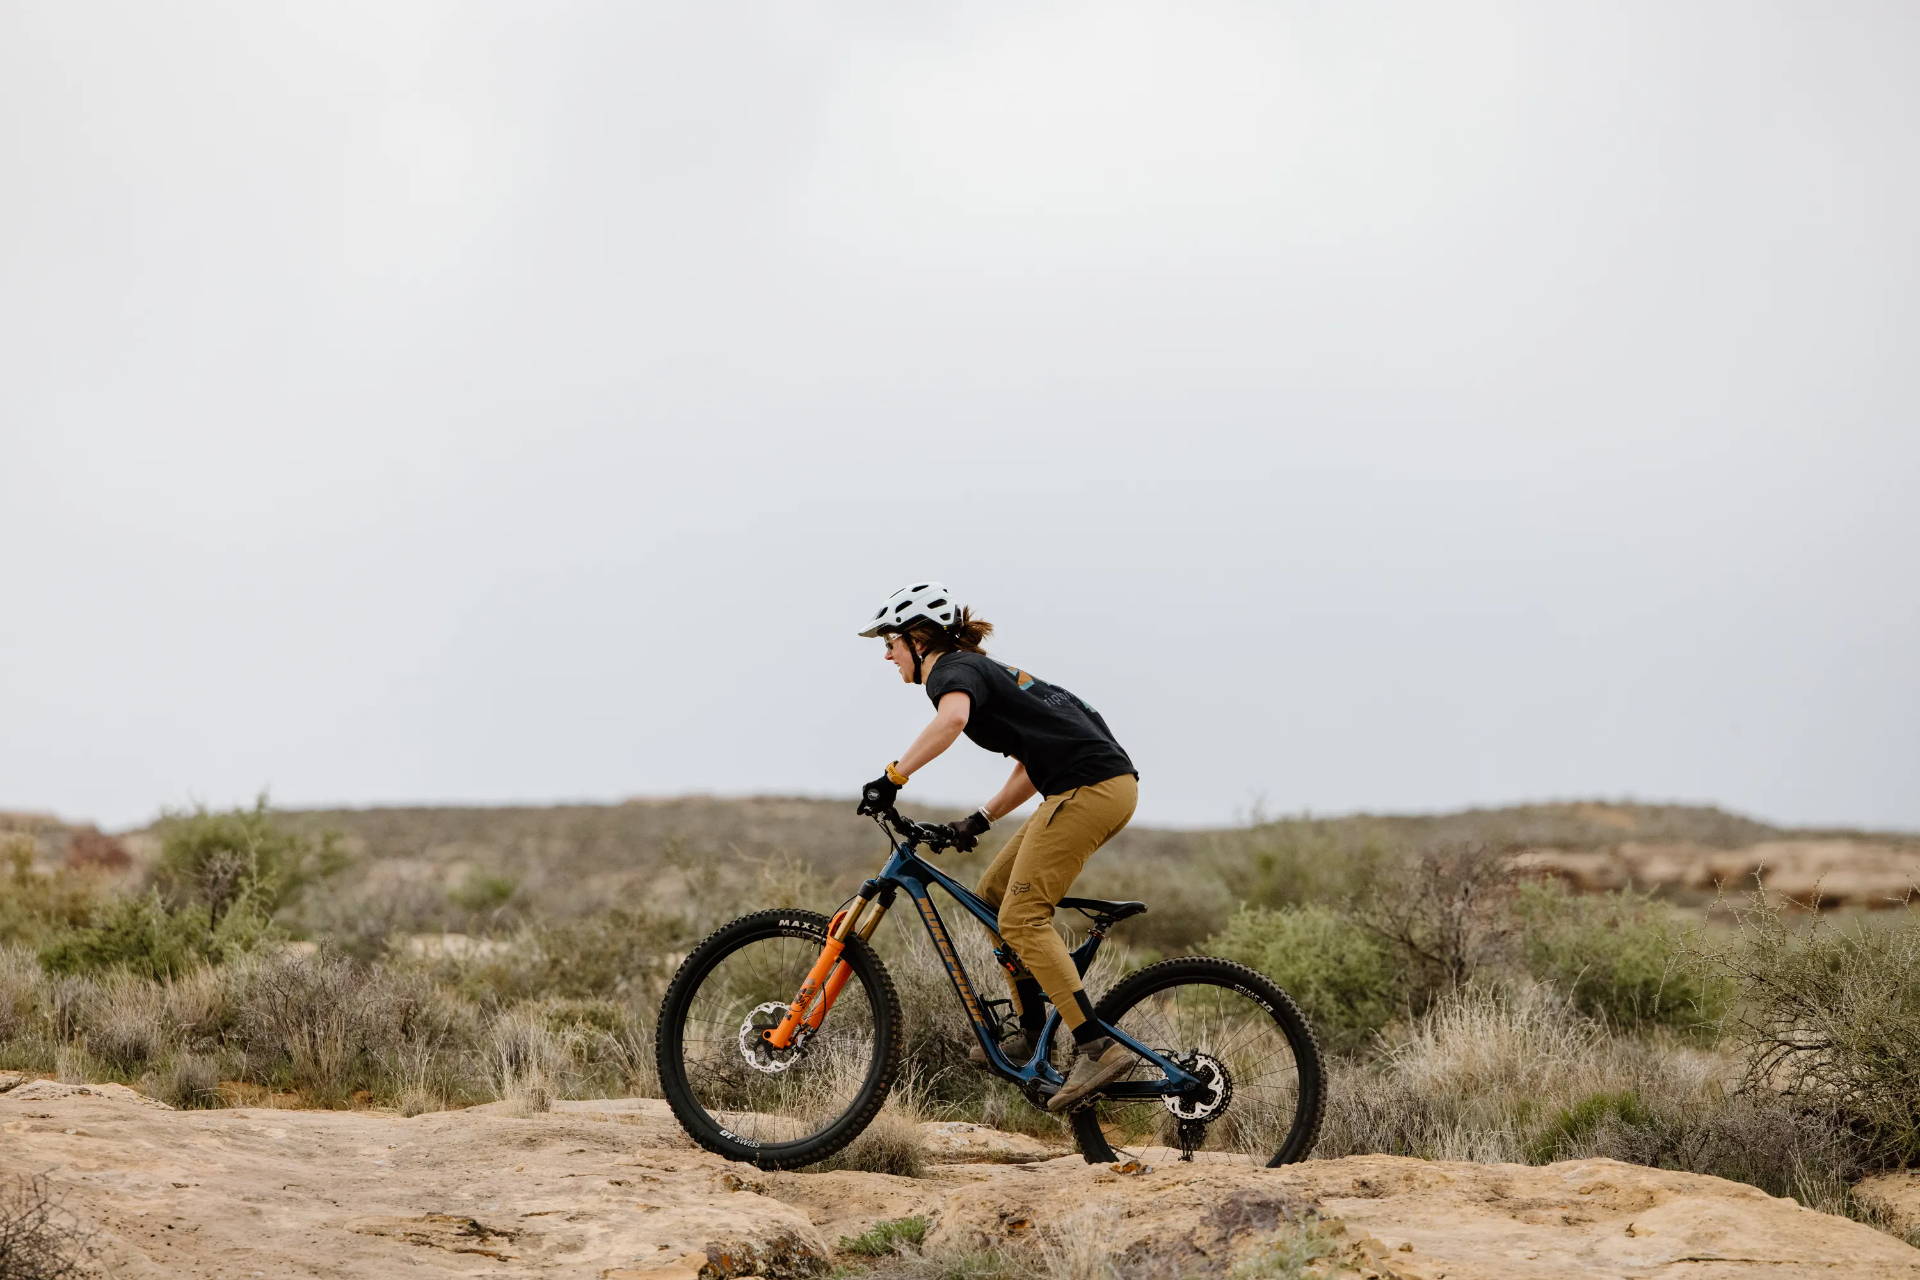 A rider on the Nukeproof Reactor mountain bike.